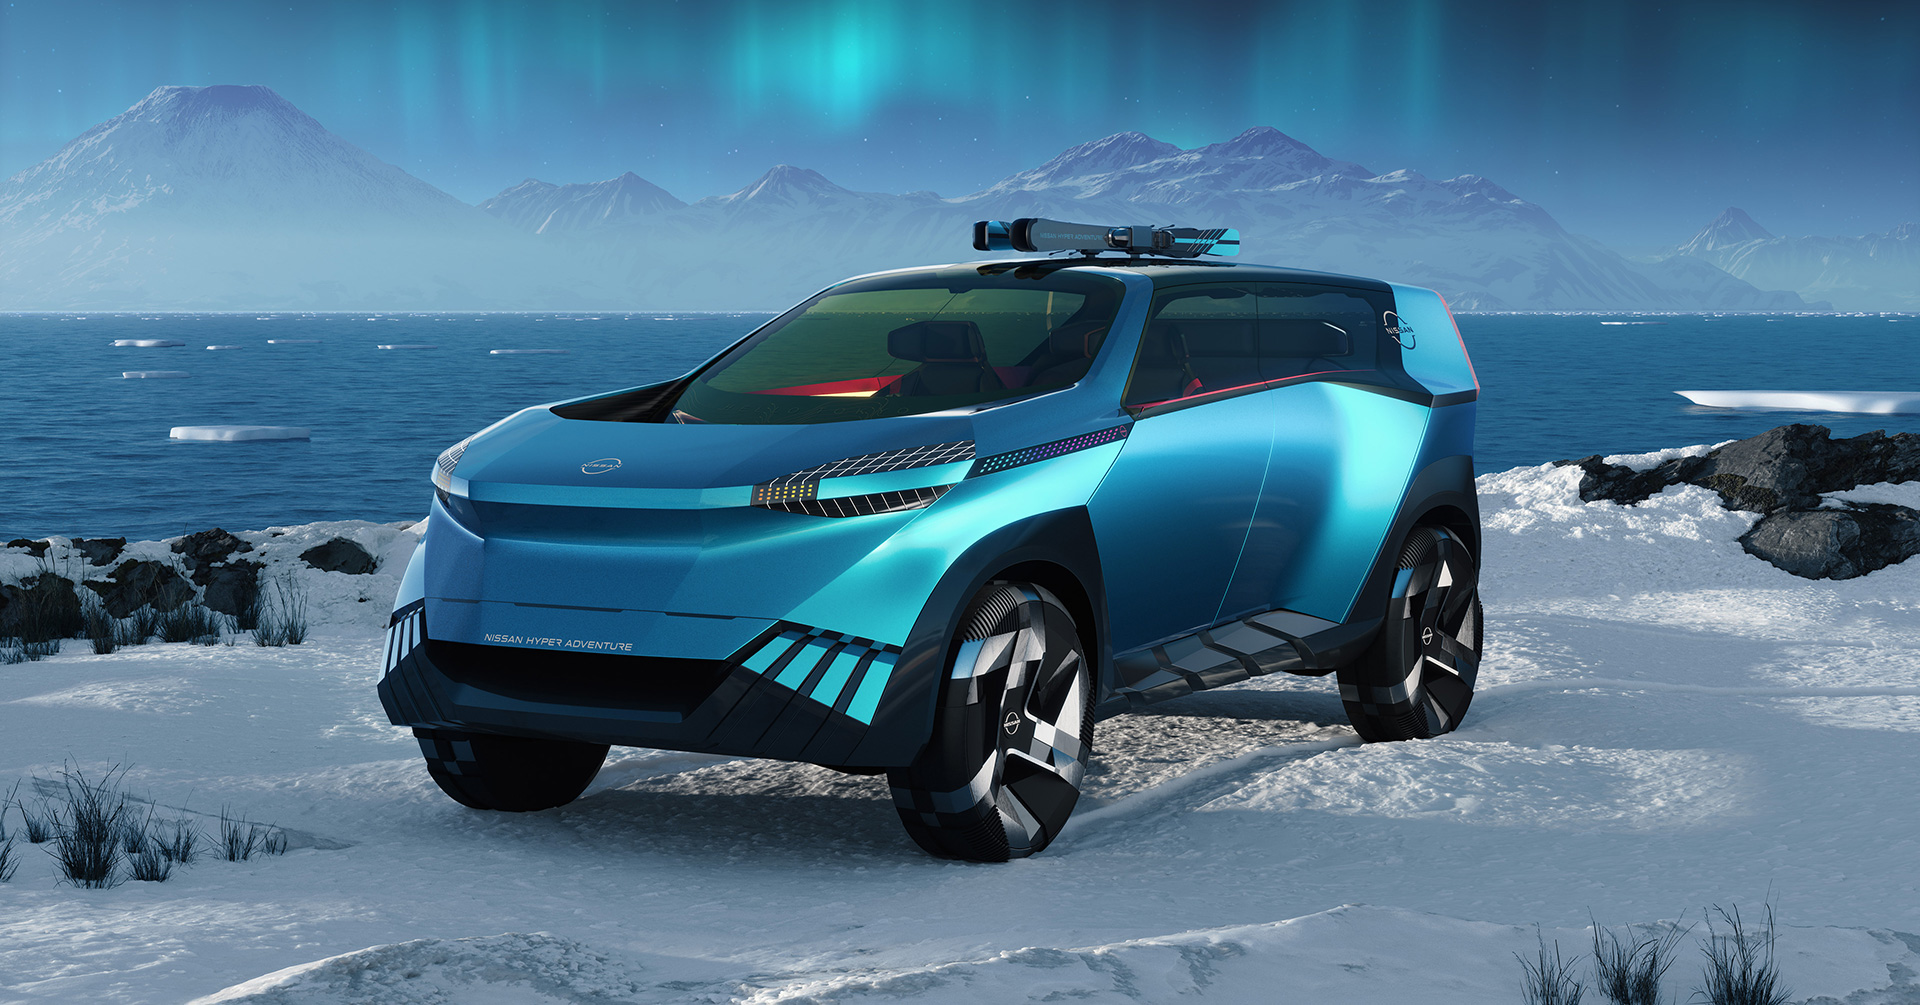 Nissan Releases Hyper Adventure Concept Ahead of Japan Mobility Show